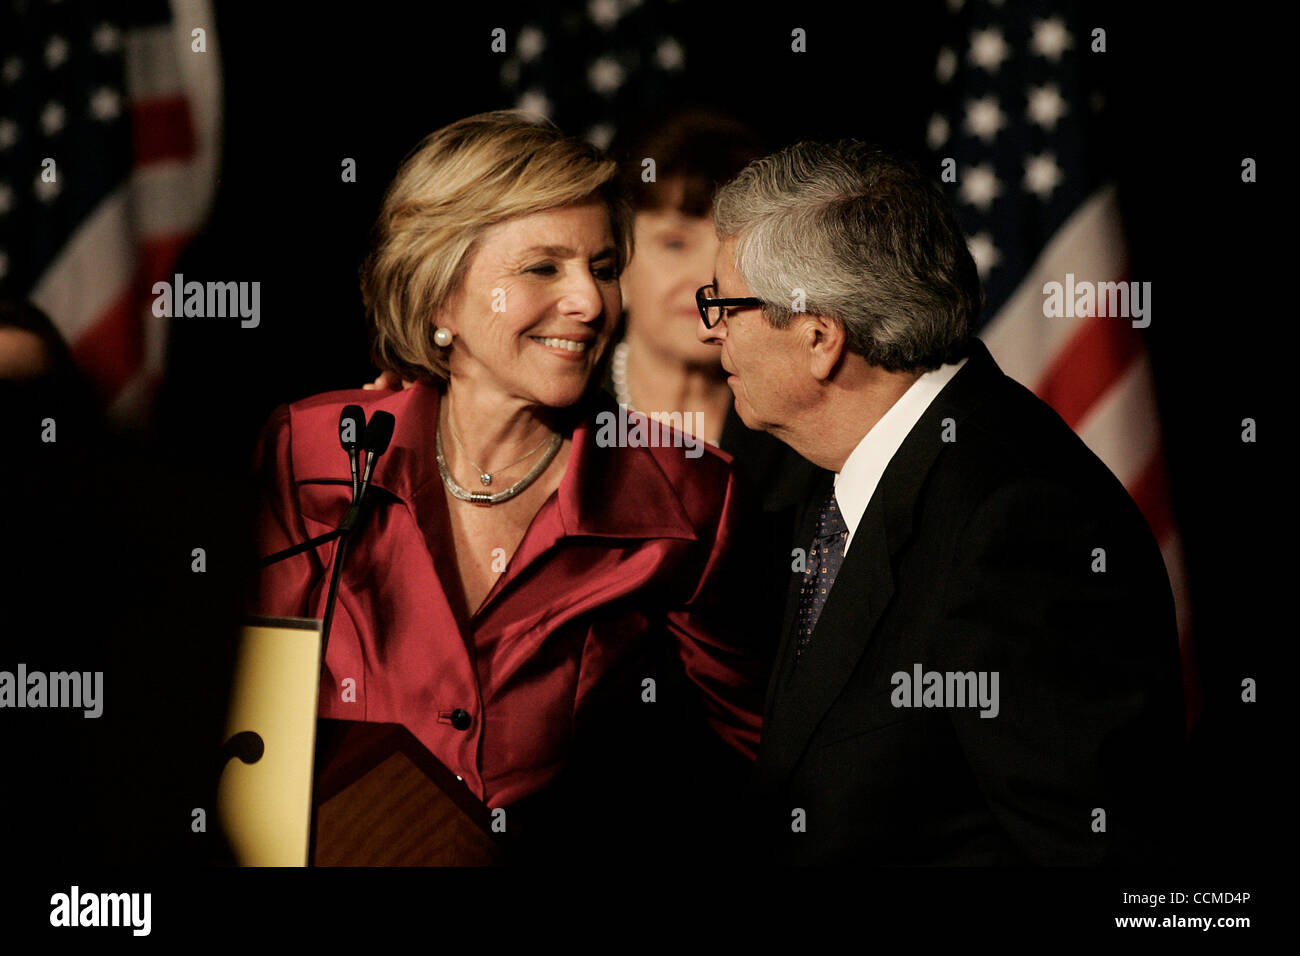 Nov. 2, 2010 - Los Angeles, California, U.S - Sen. Barbara Boxer, (D-Calif.), smiles at her husband Stewart Boxer after declaringvictory on election night , November 2, 2010, at the Renaissance Hollywood Hotel, as votes were still being counted and her Republican opponent, Carly Fiorina, refused to  Stock Photo